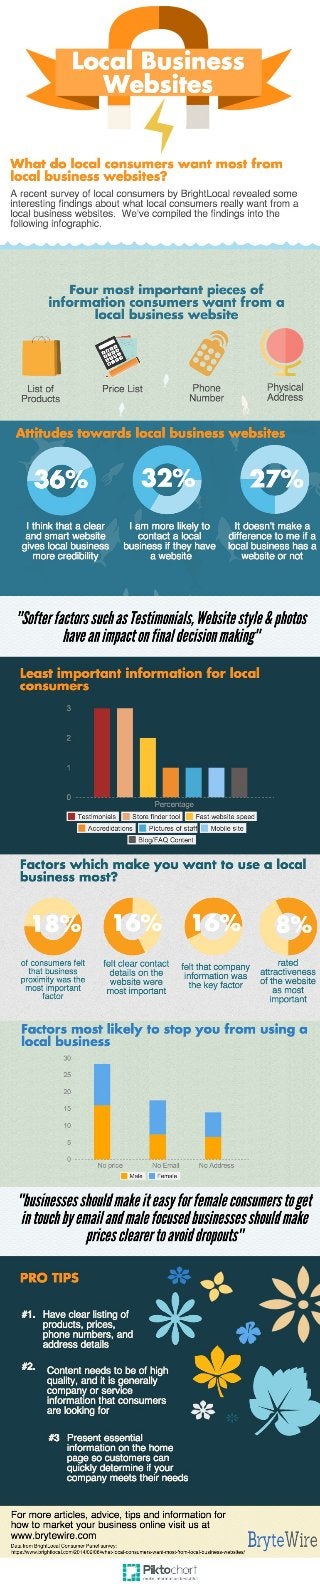 What Consumers Want From a Local Business Website